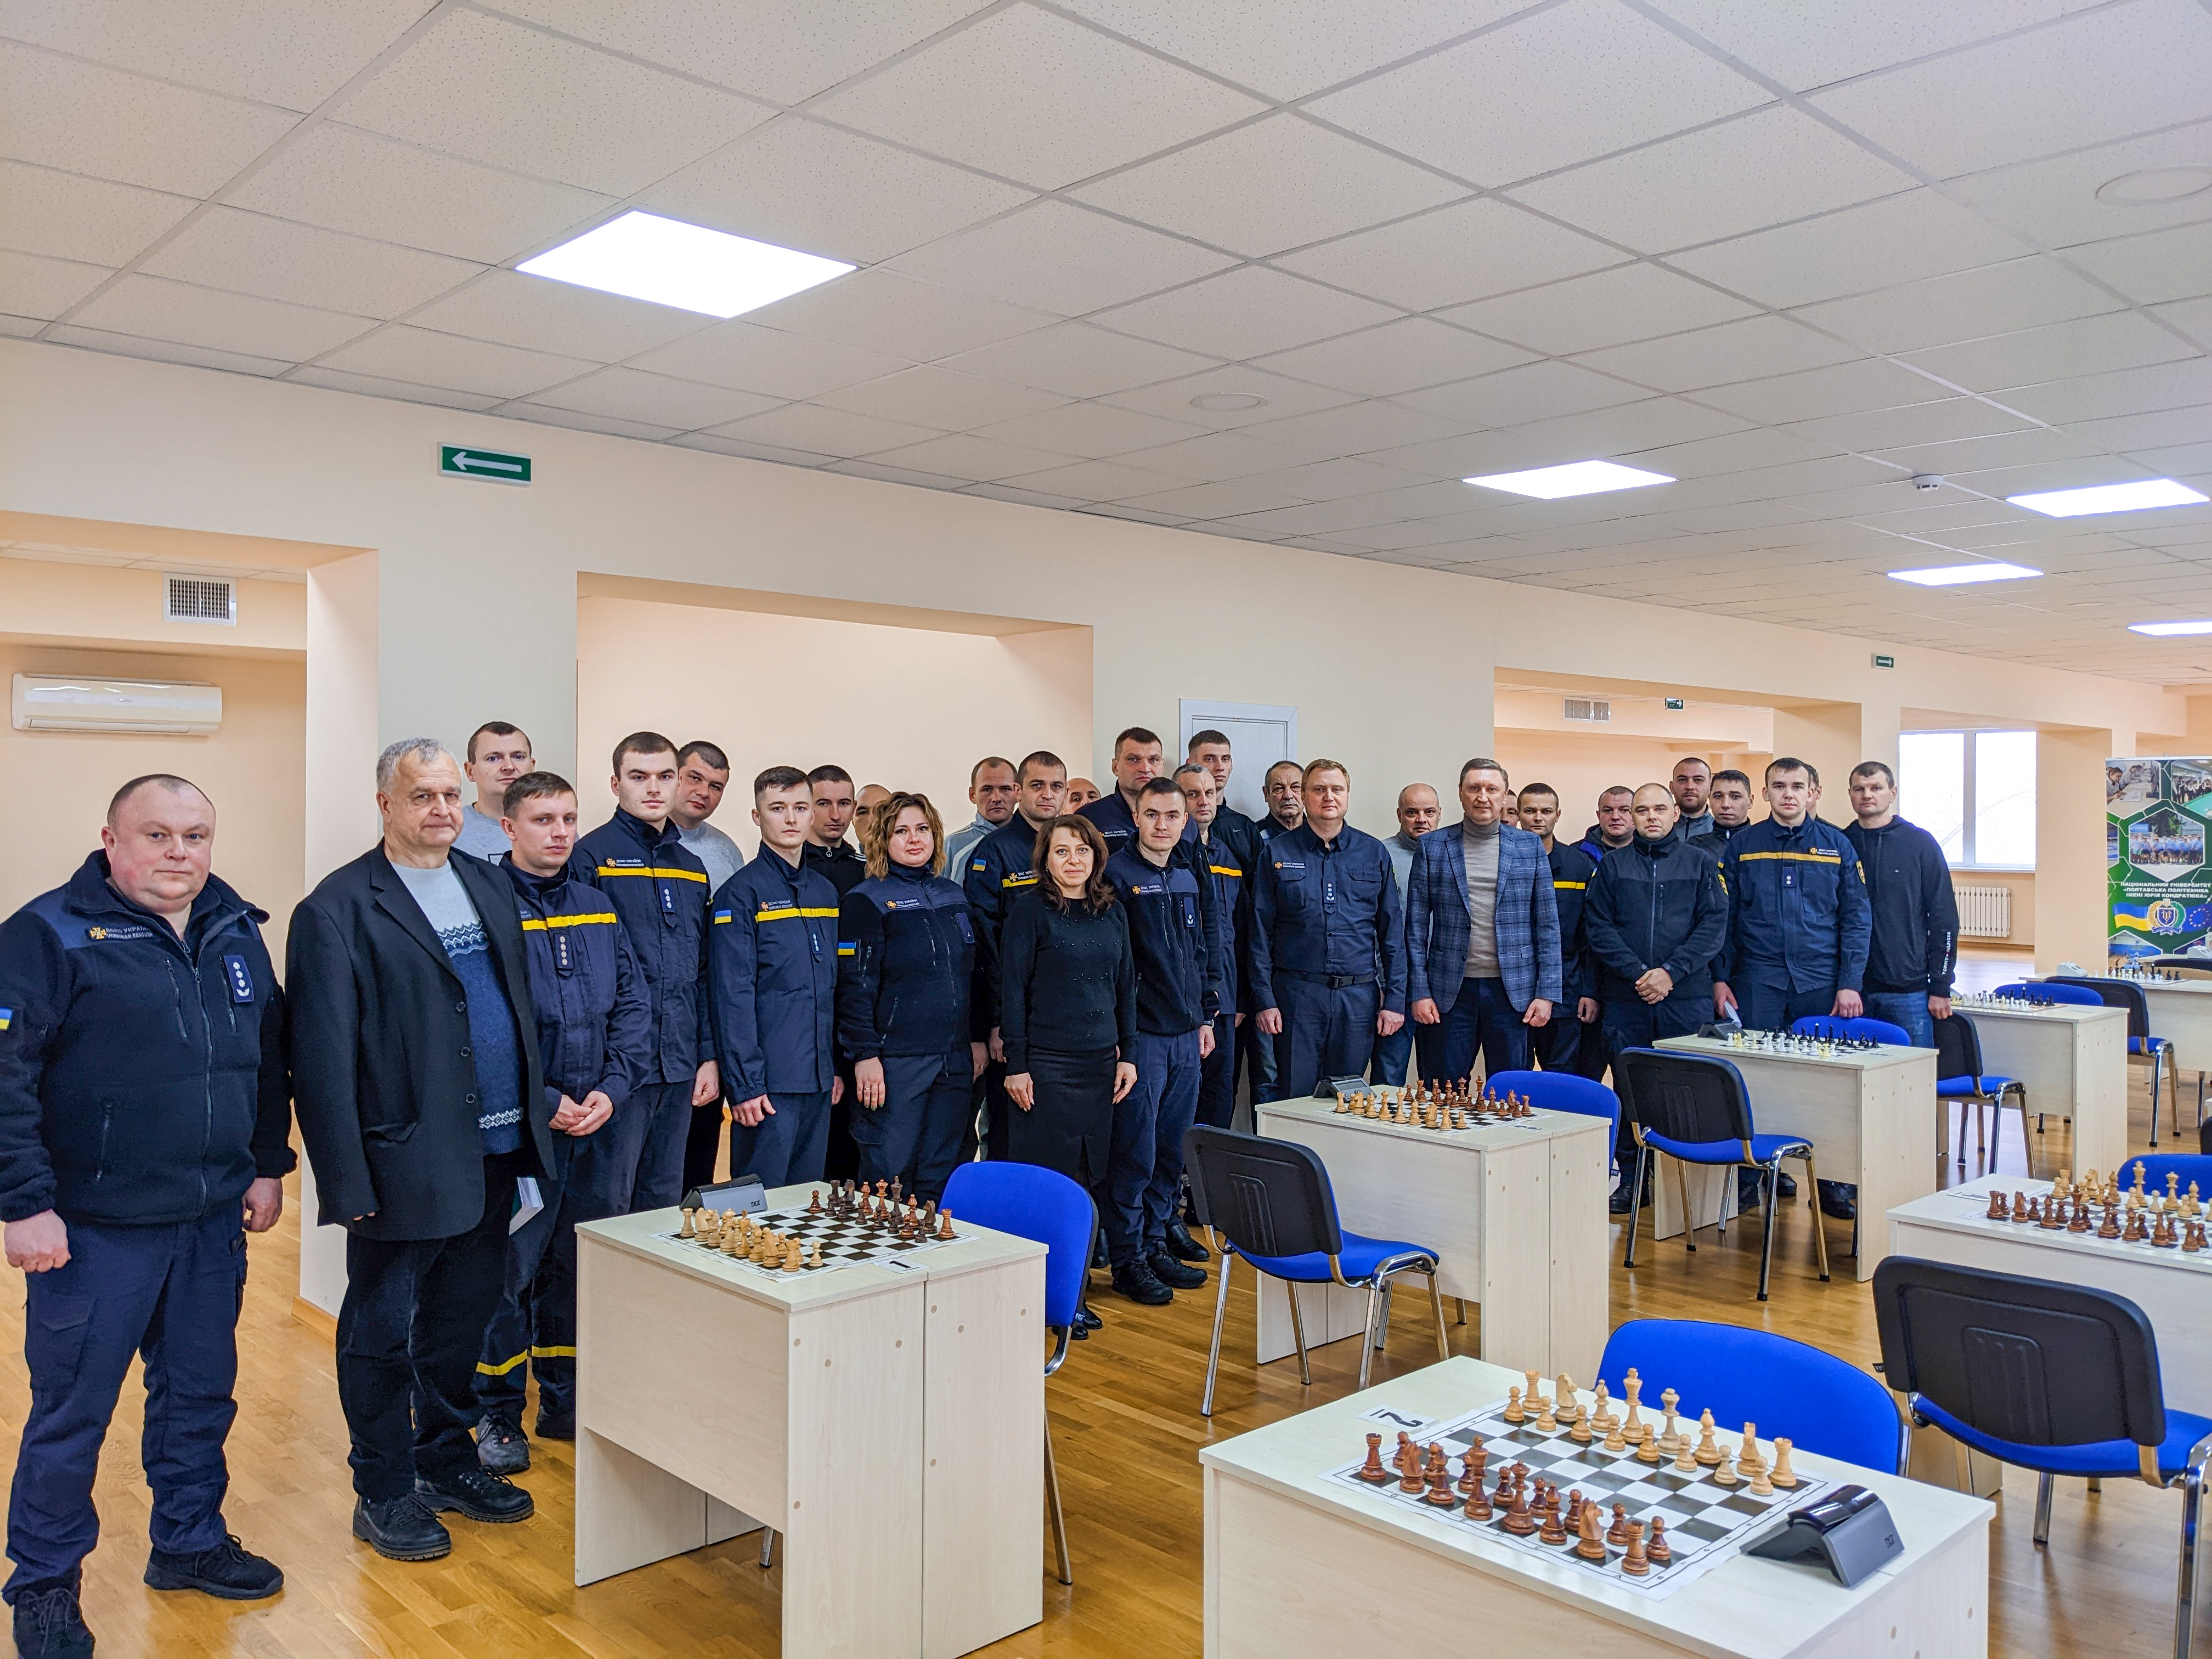 The Regional Chess Championships among employees of the State Emergency Service of Ukraine is held at the Poltava Polytechnic